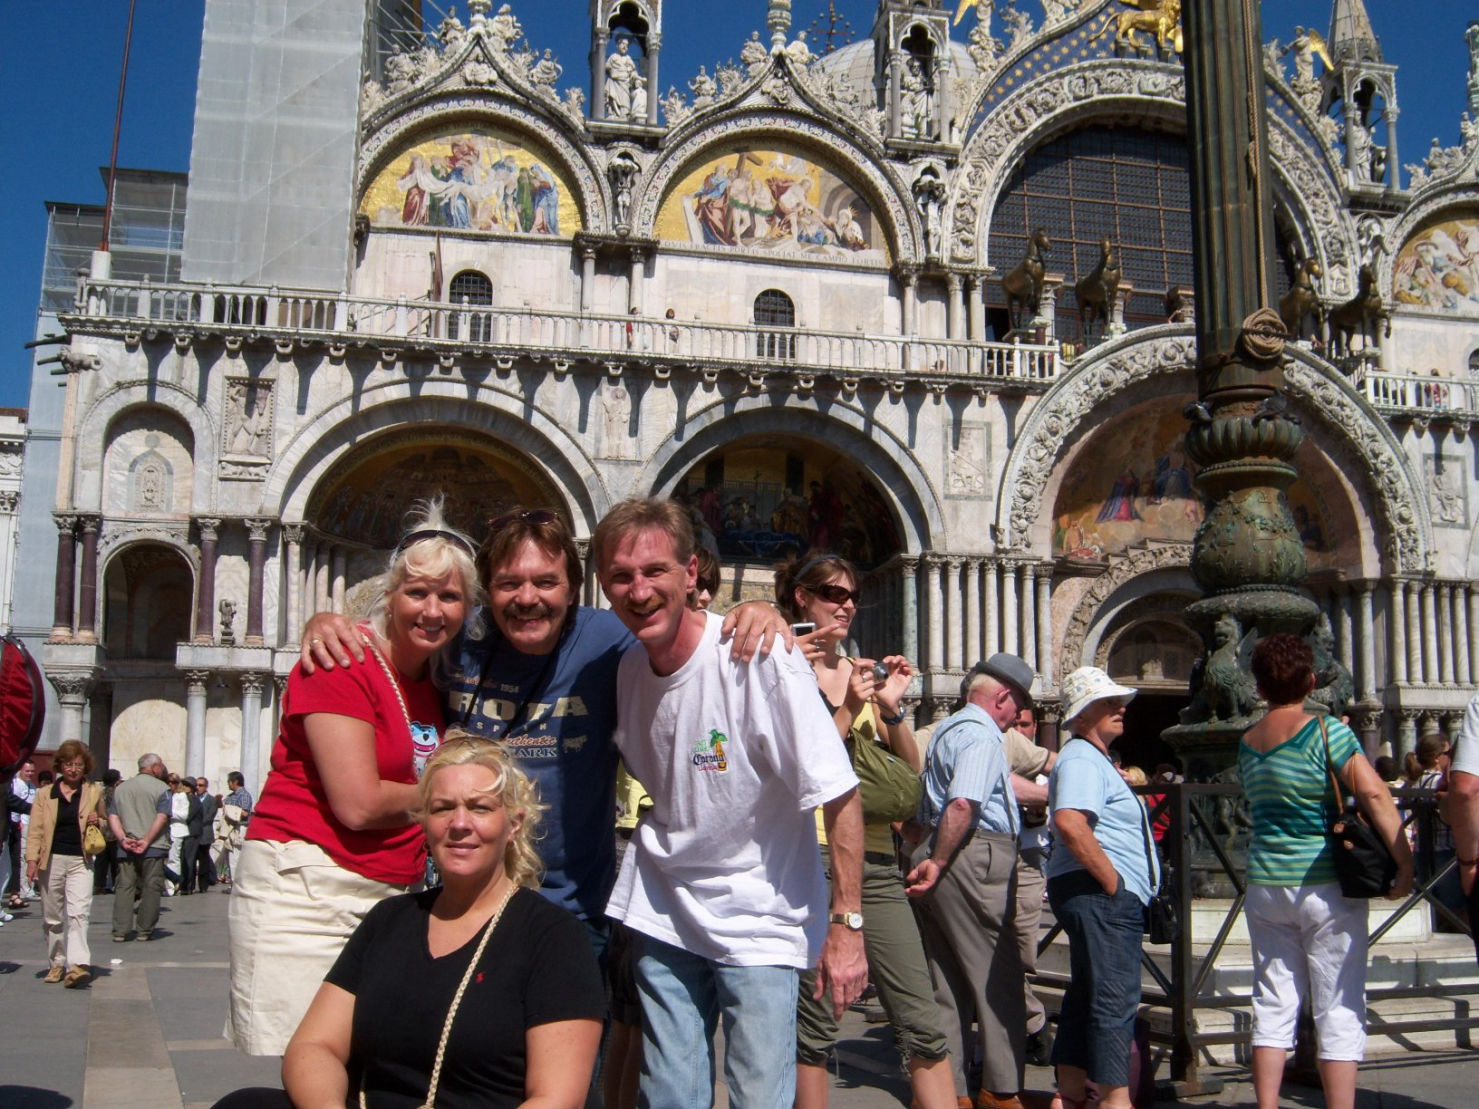 Donna Moore, Crystal Stupar, Rick Moore, Rodney Kelley in San Marcos Square in Venice, Italy